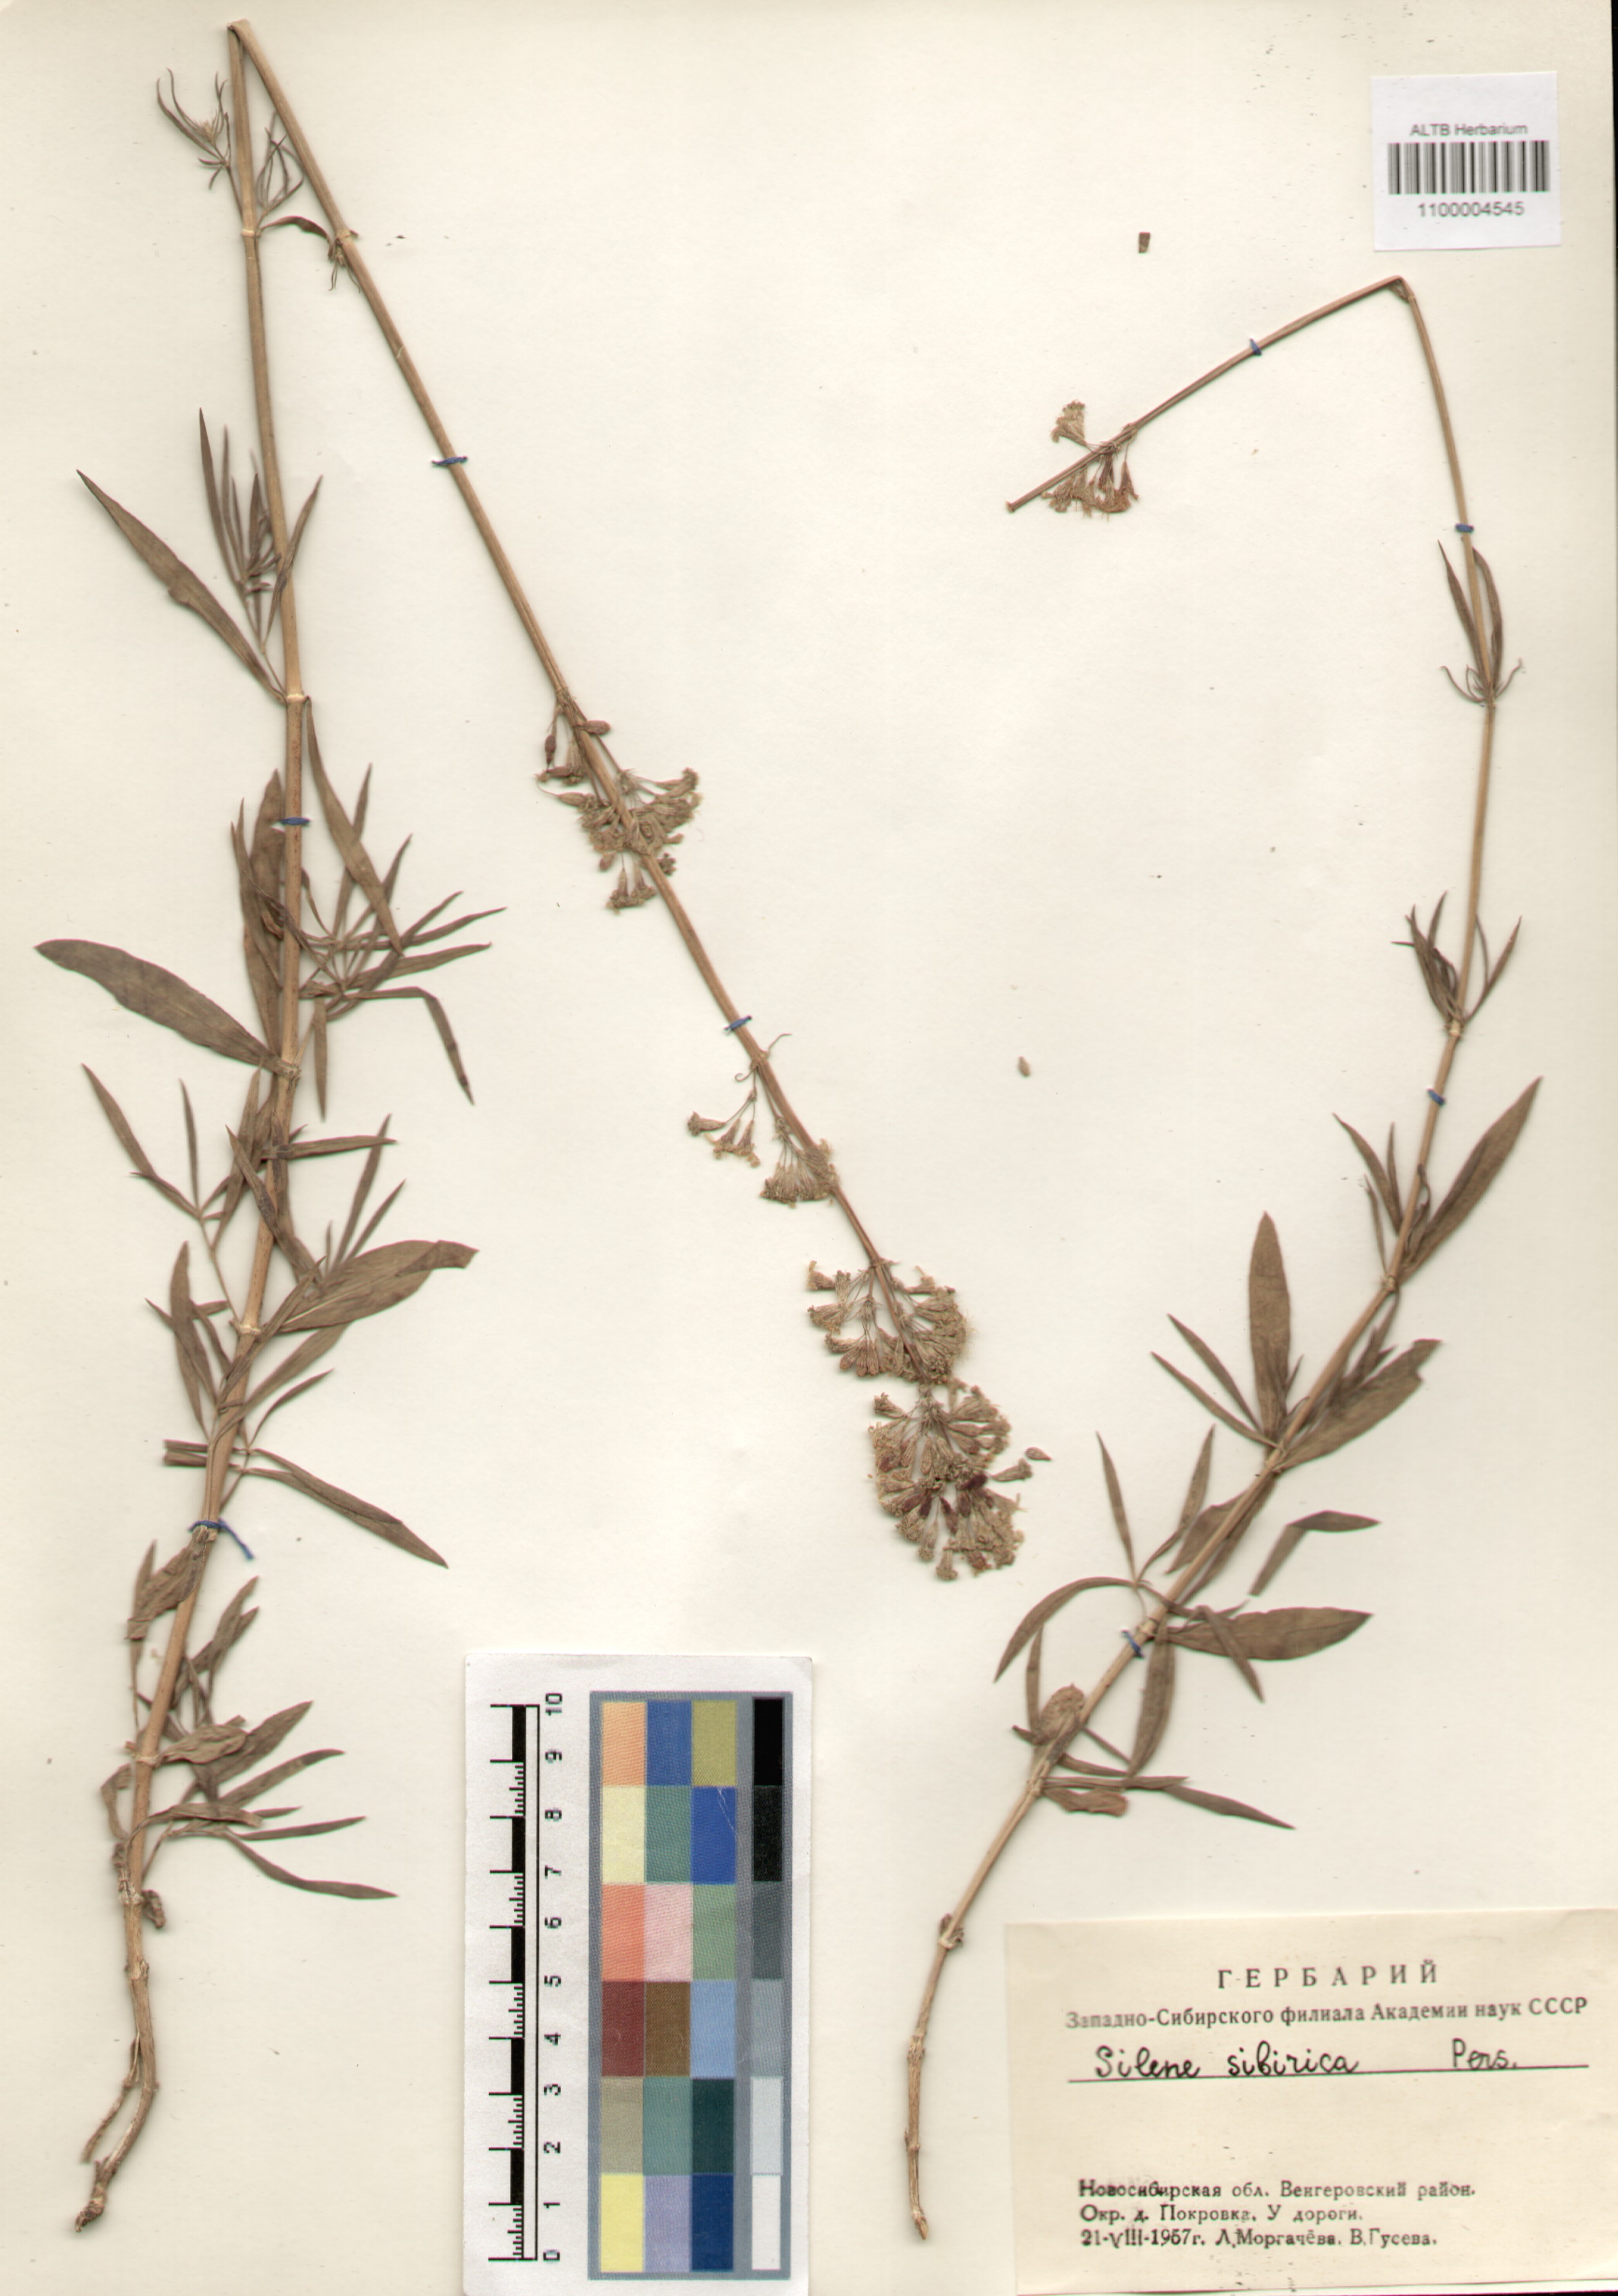 Caryophyllaceae,Silene sibirica (L.) Pers.